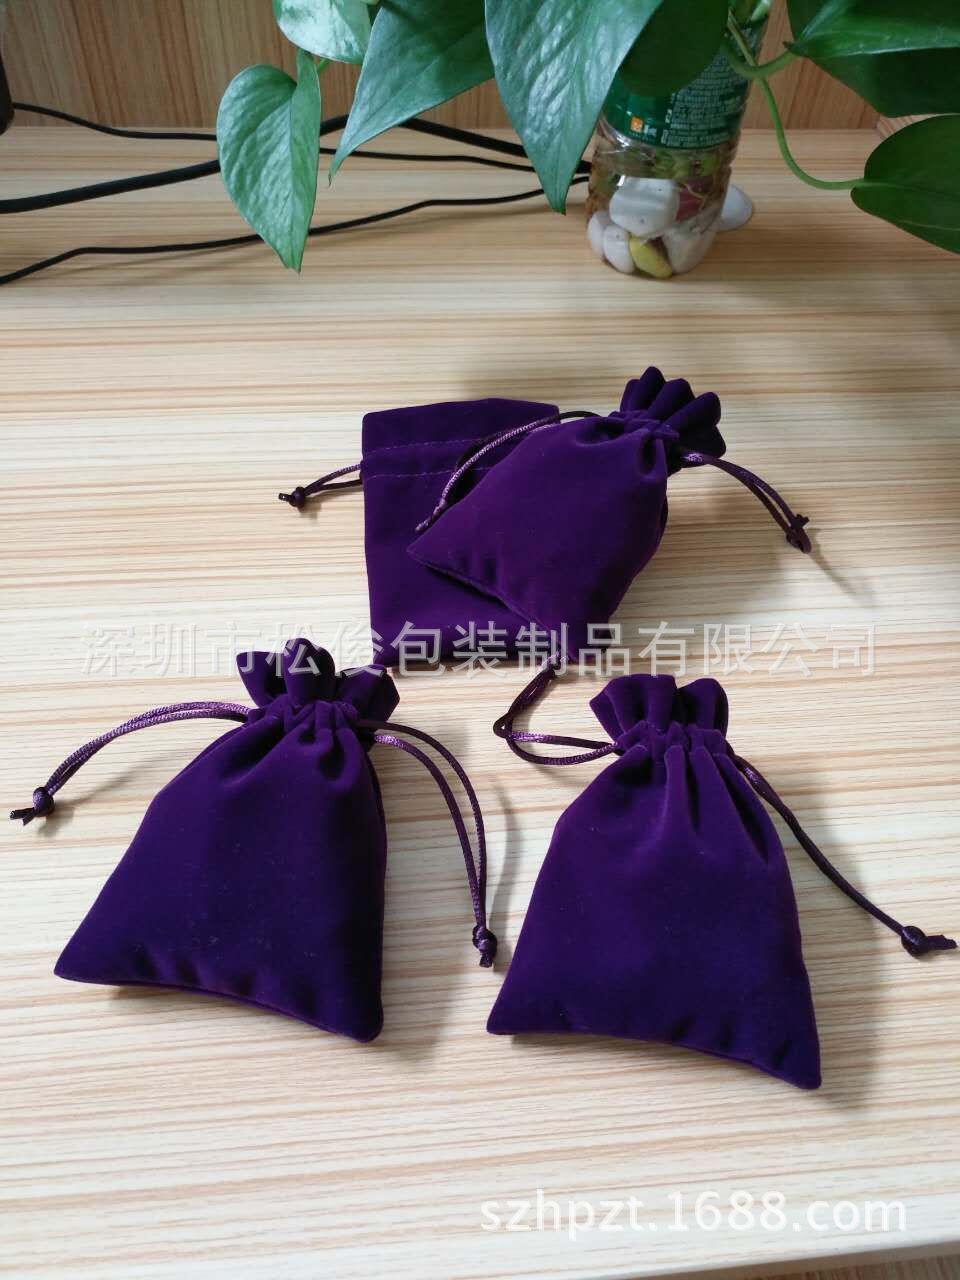 Manufactor Long-term Produce wholesale Velvet Cloth bag Cosmetic mirror Flannel bags Beam port Flannel bags Price Cheap